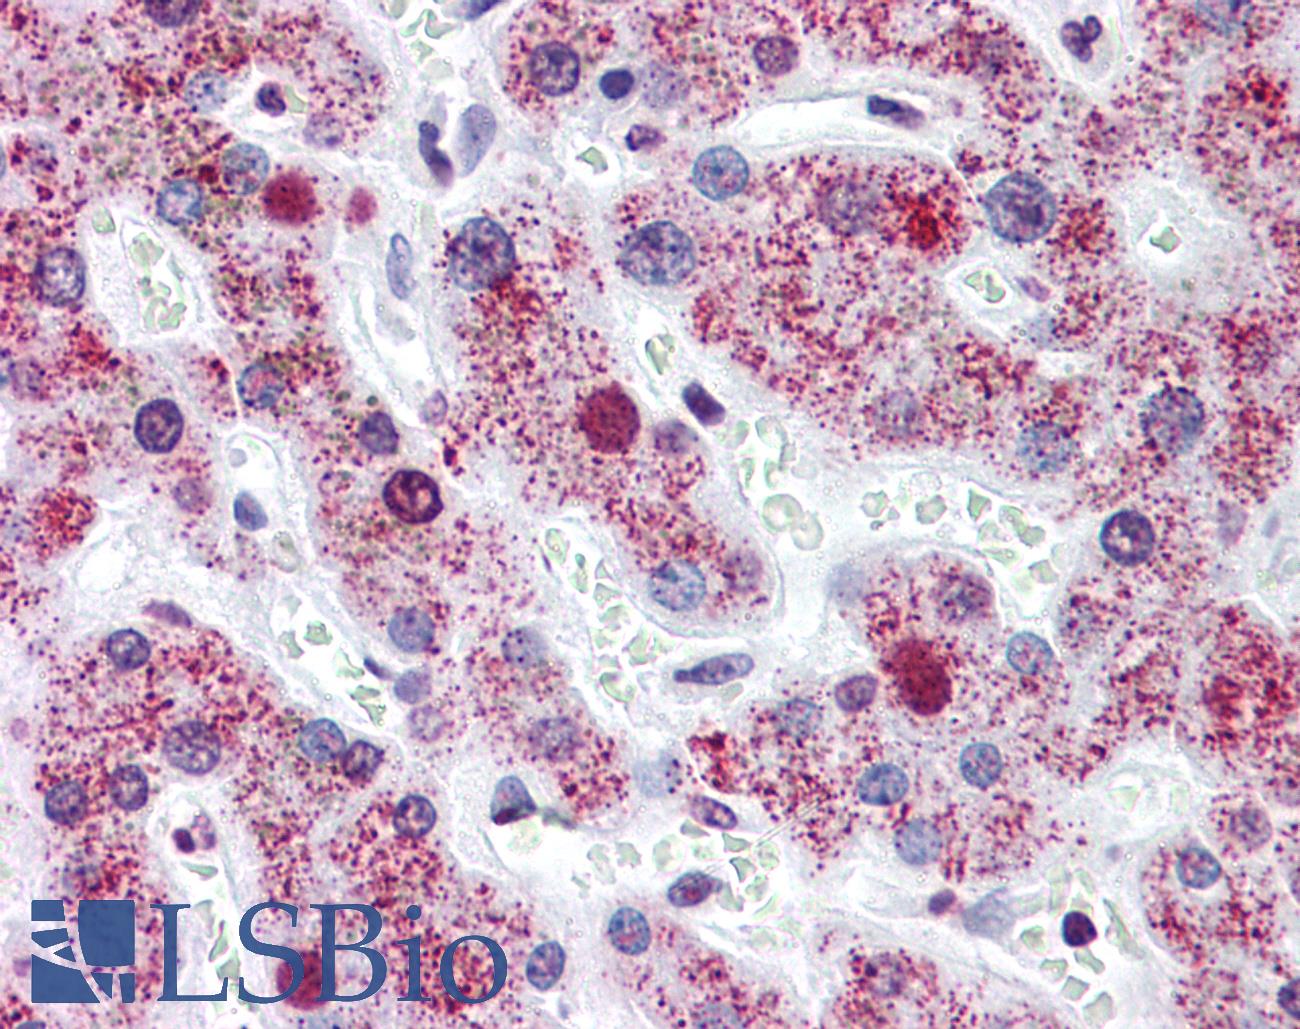 AGXT / SPT Antibody - Anti-AGXT antibody IHC of human liver. Immunohistochemistry of formalin-fixed, paraffin-embedded tissue after heat-induced antigen retrieval. Antibody concentration 5 ug/ml.